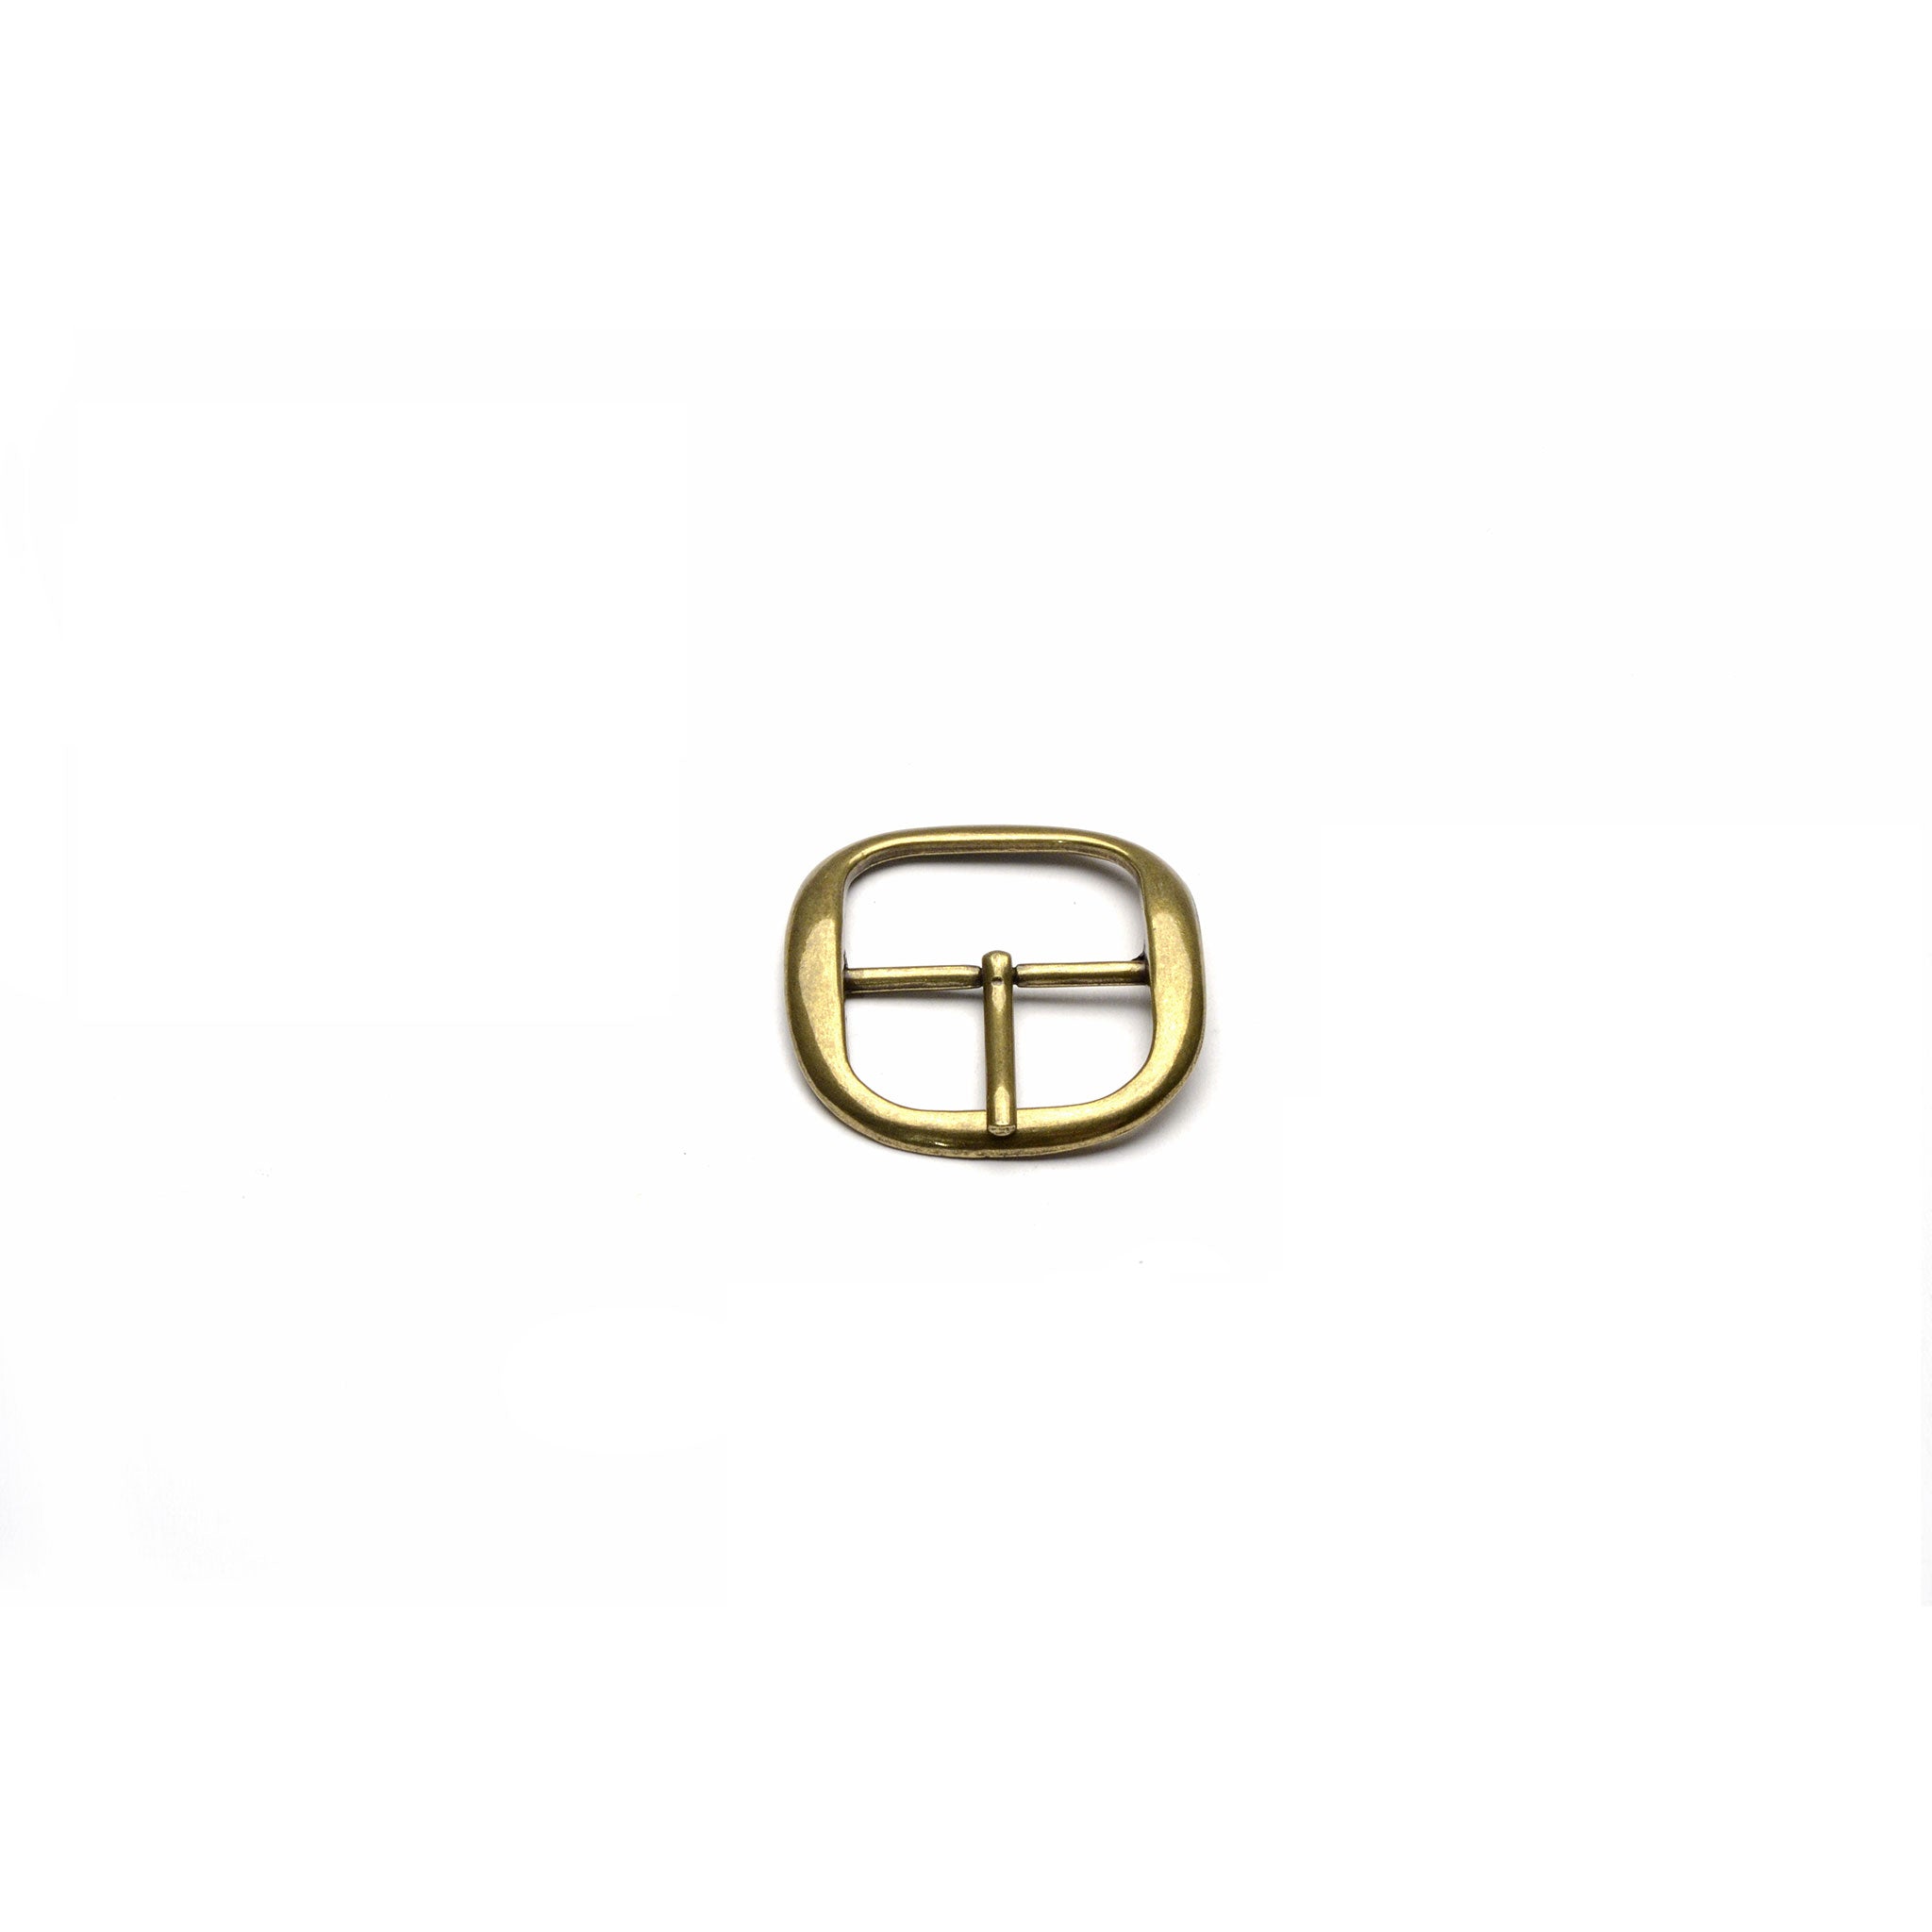 44mm Econo Centre Bar Buckle - Antique Brass  Finish from Identity Leathercraft